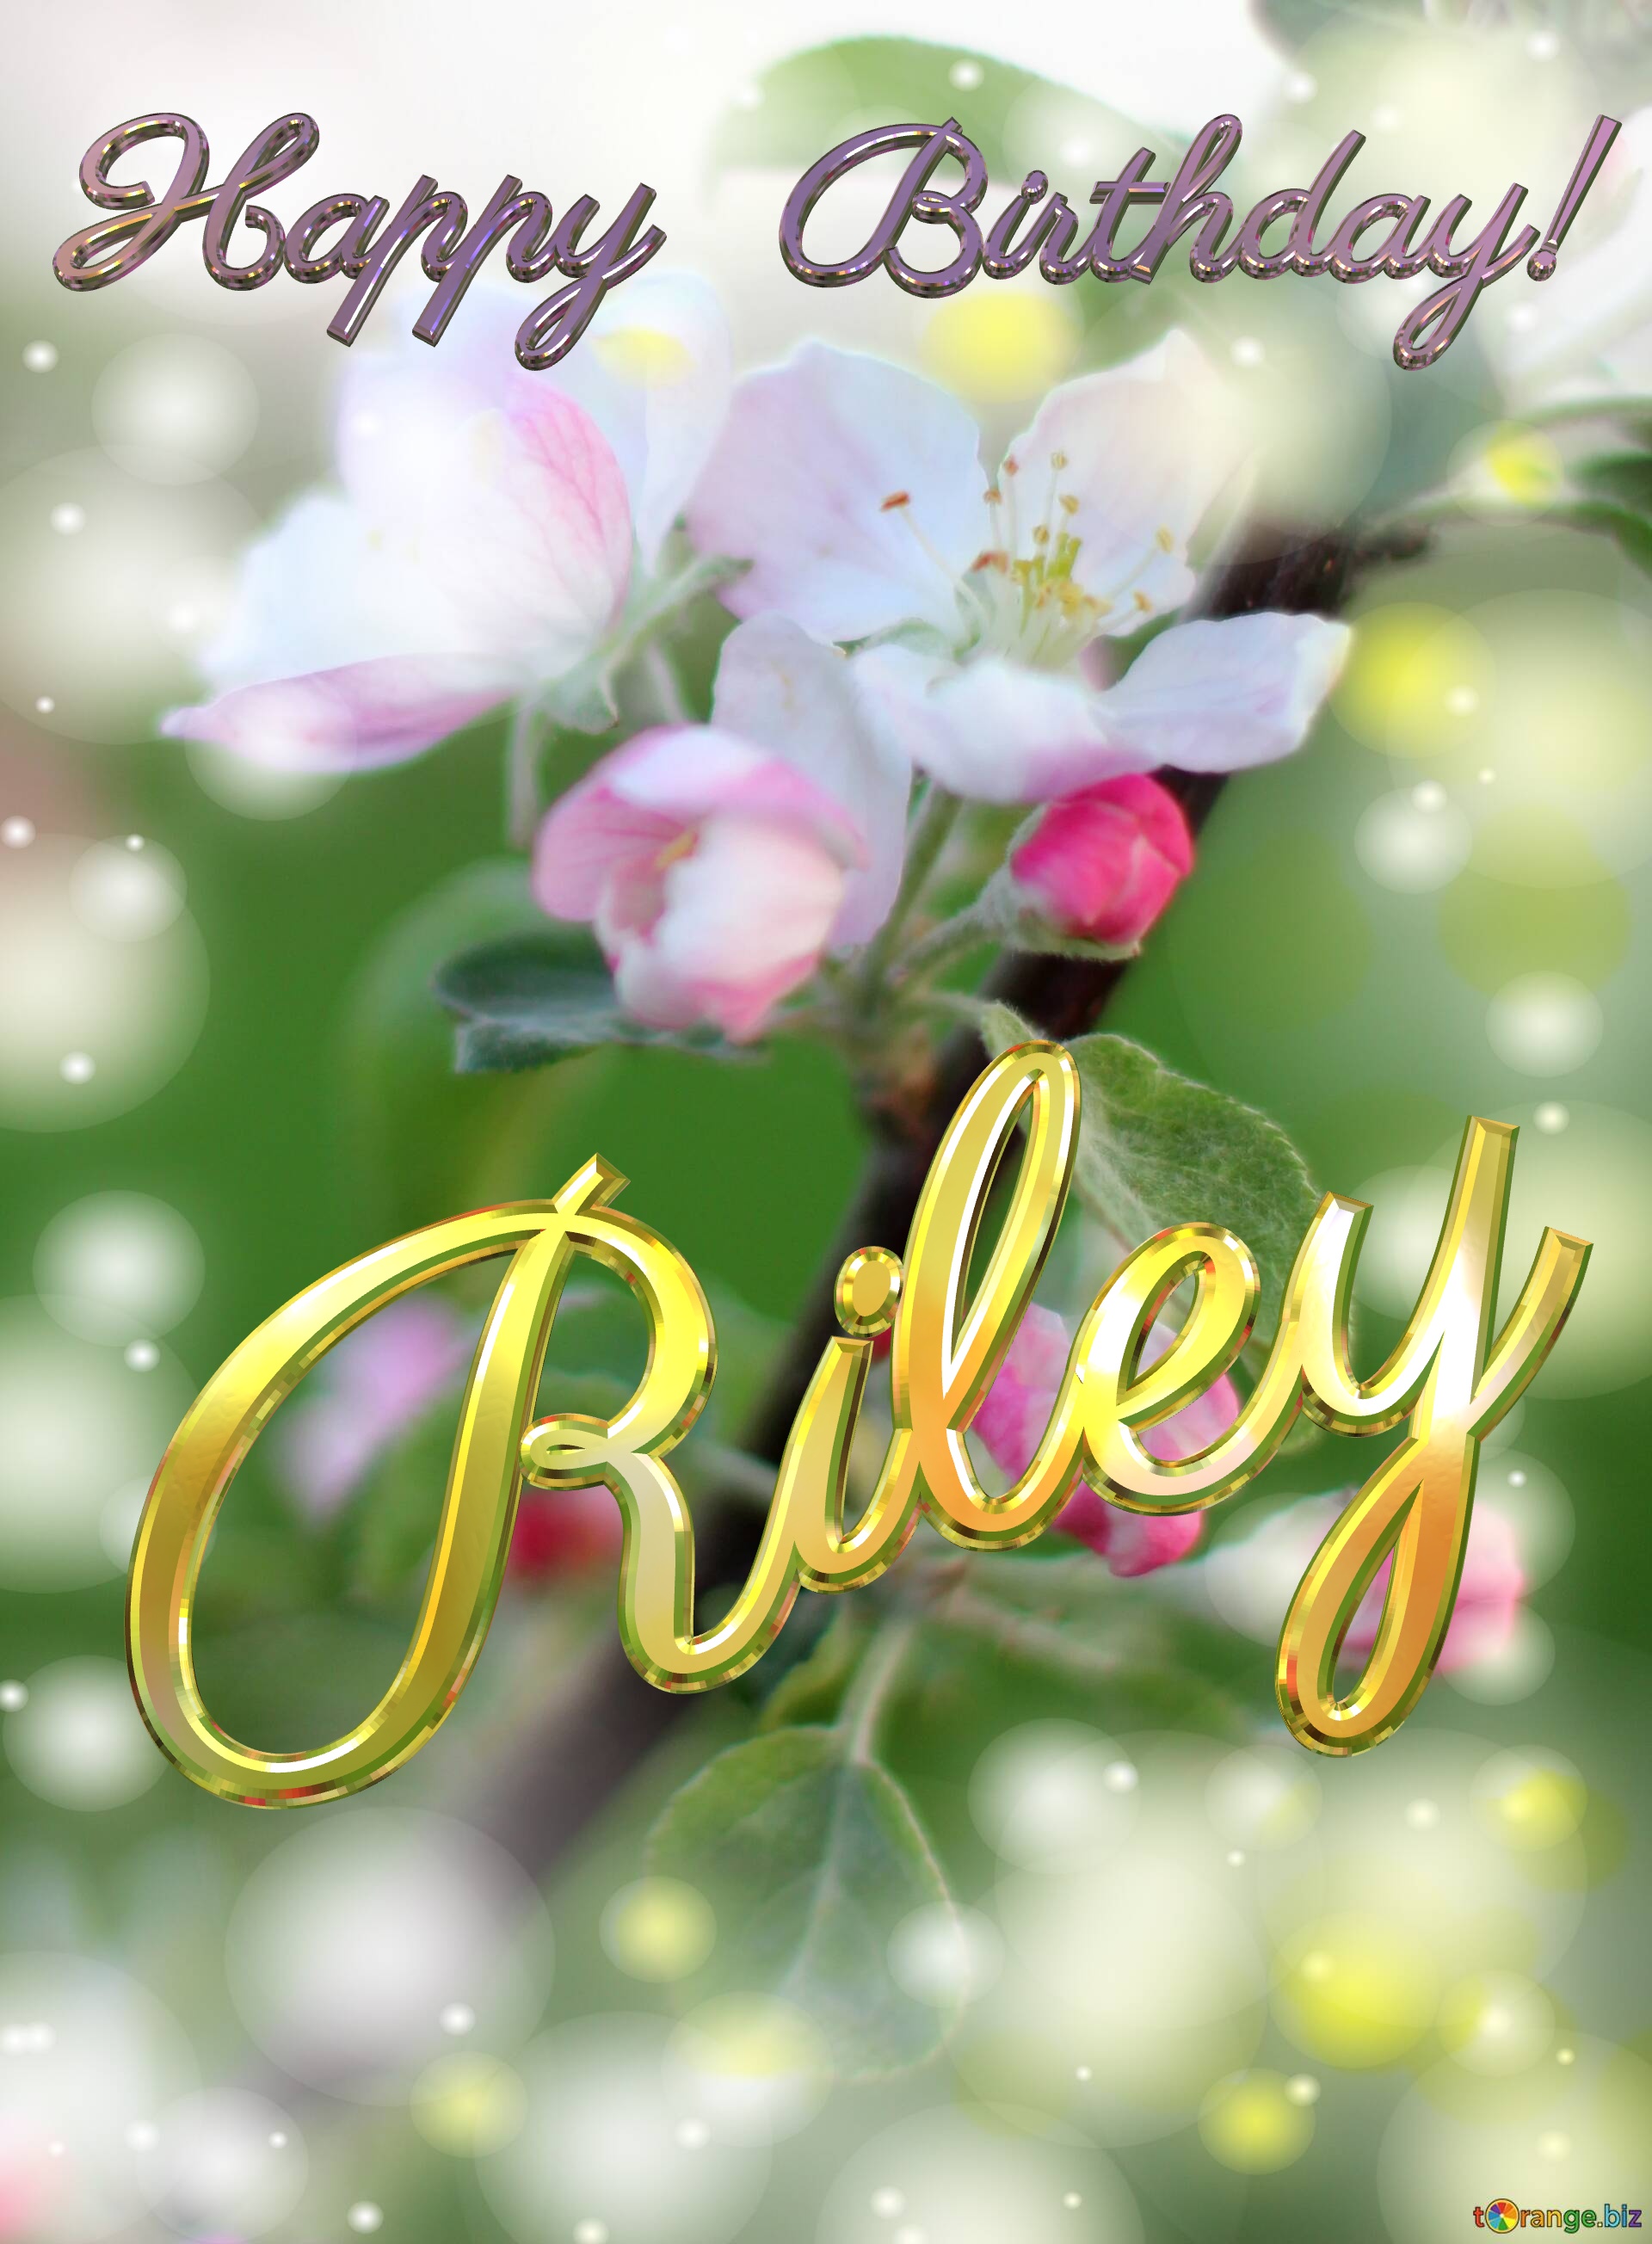 Riley Happy Birthday! Flowers of the Apple-tree background №0